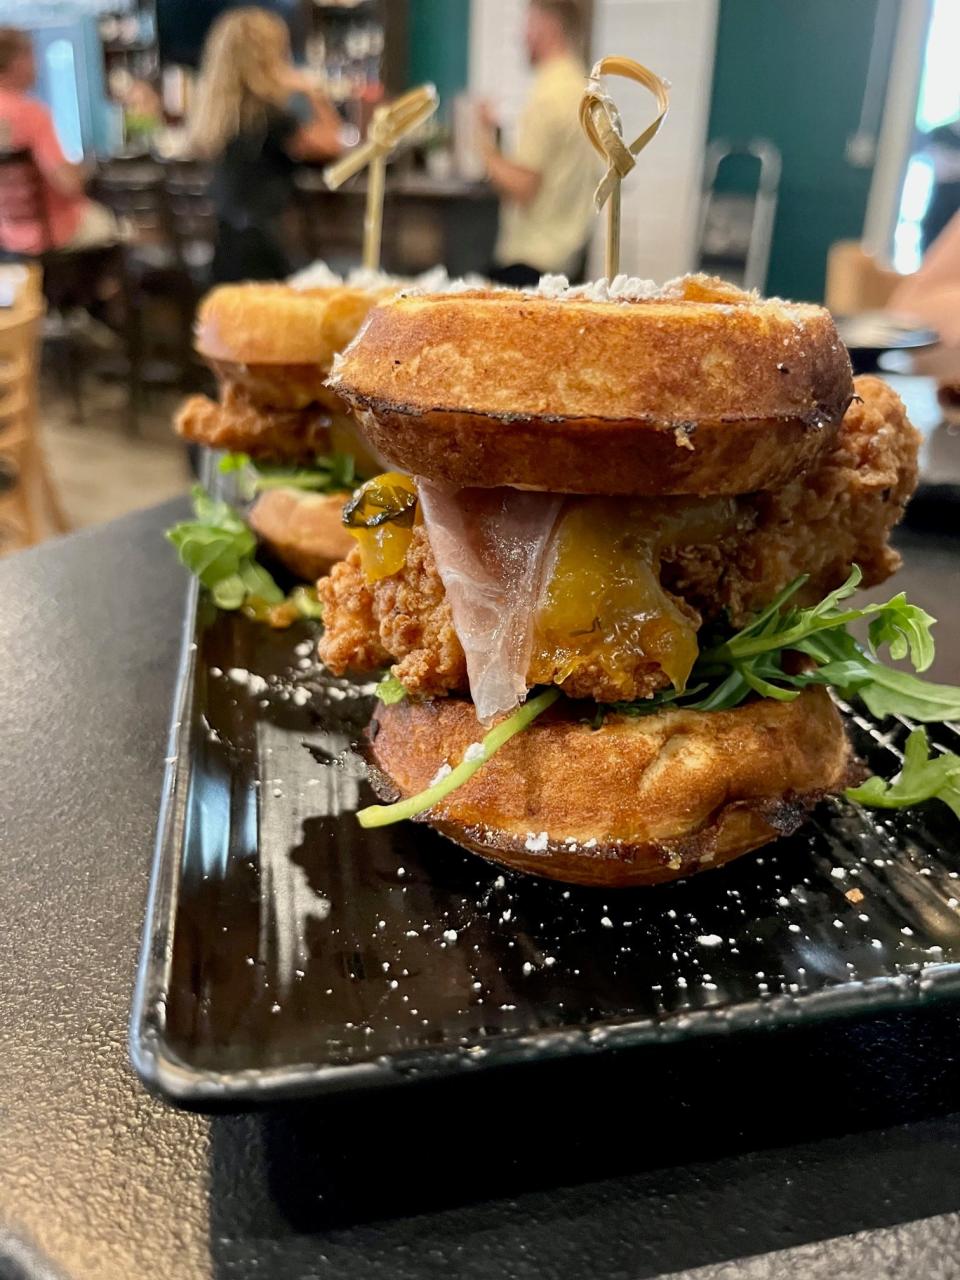 Front Porch Social's chicken & waffle sliders are served with arugula, peach compote, fennel honey, fig butter and clove syrup.